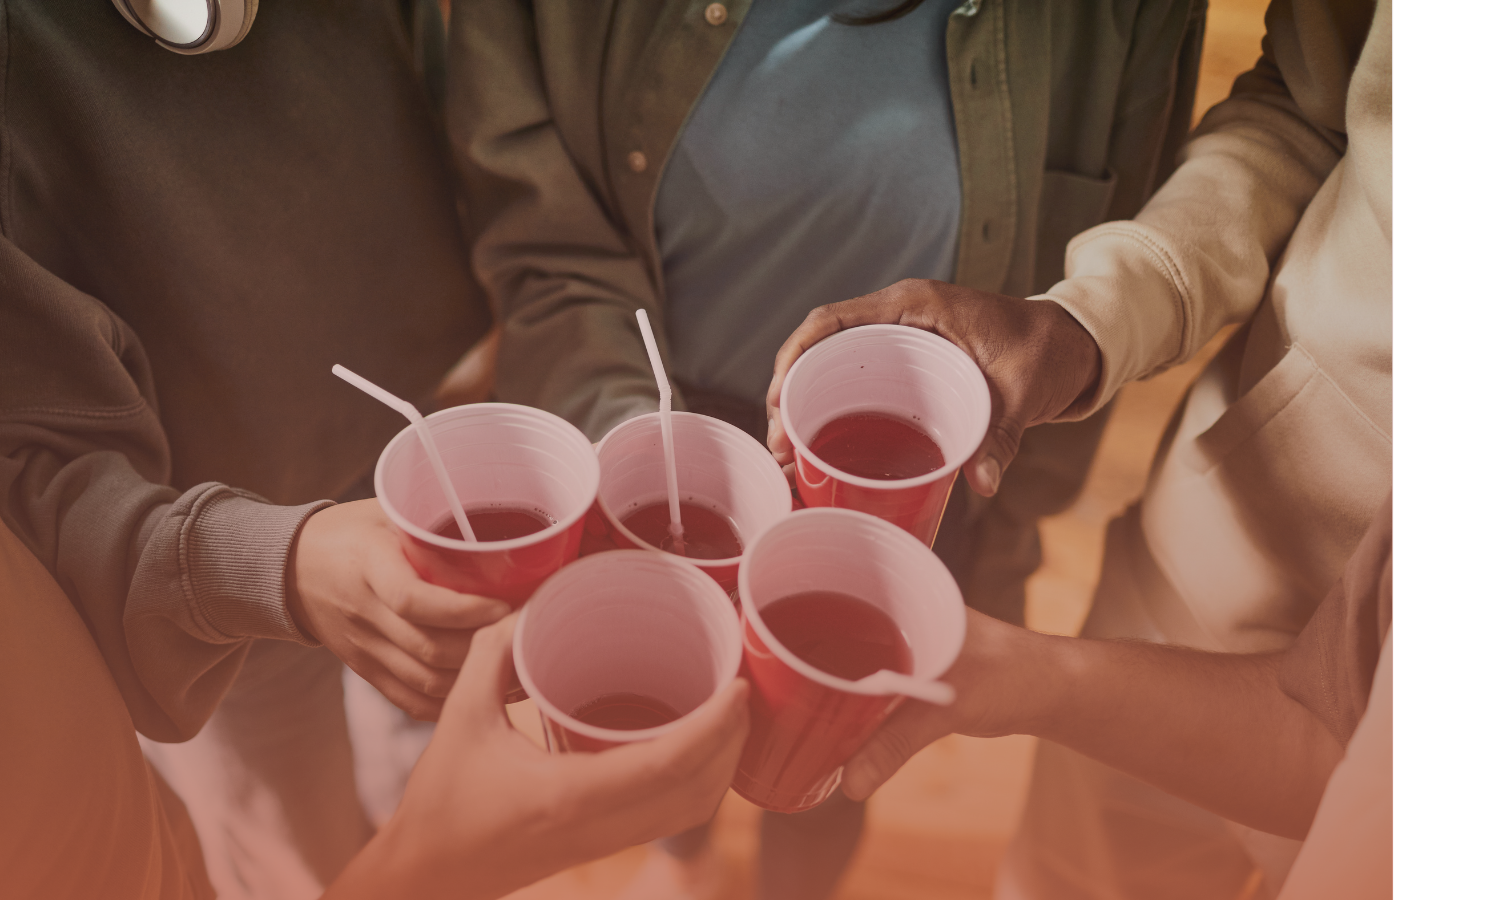 Group of people holding red plastic cups of red liquid